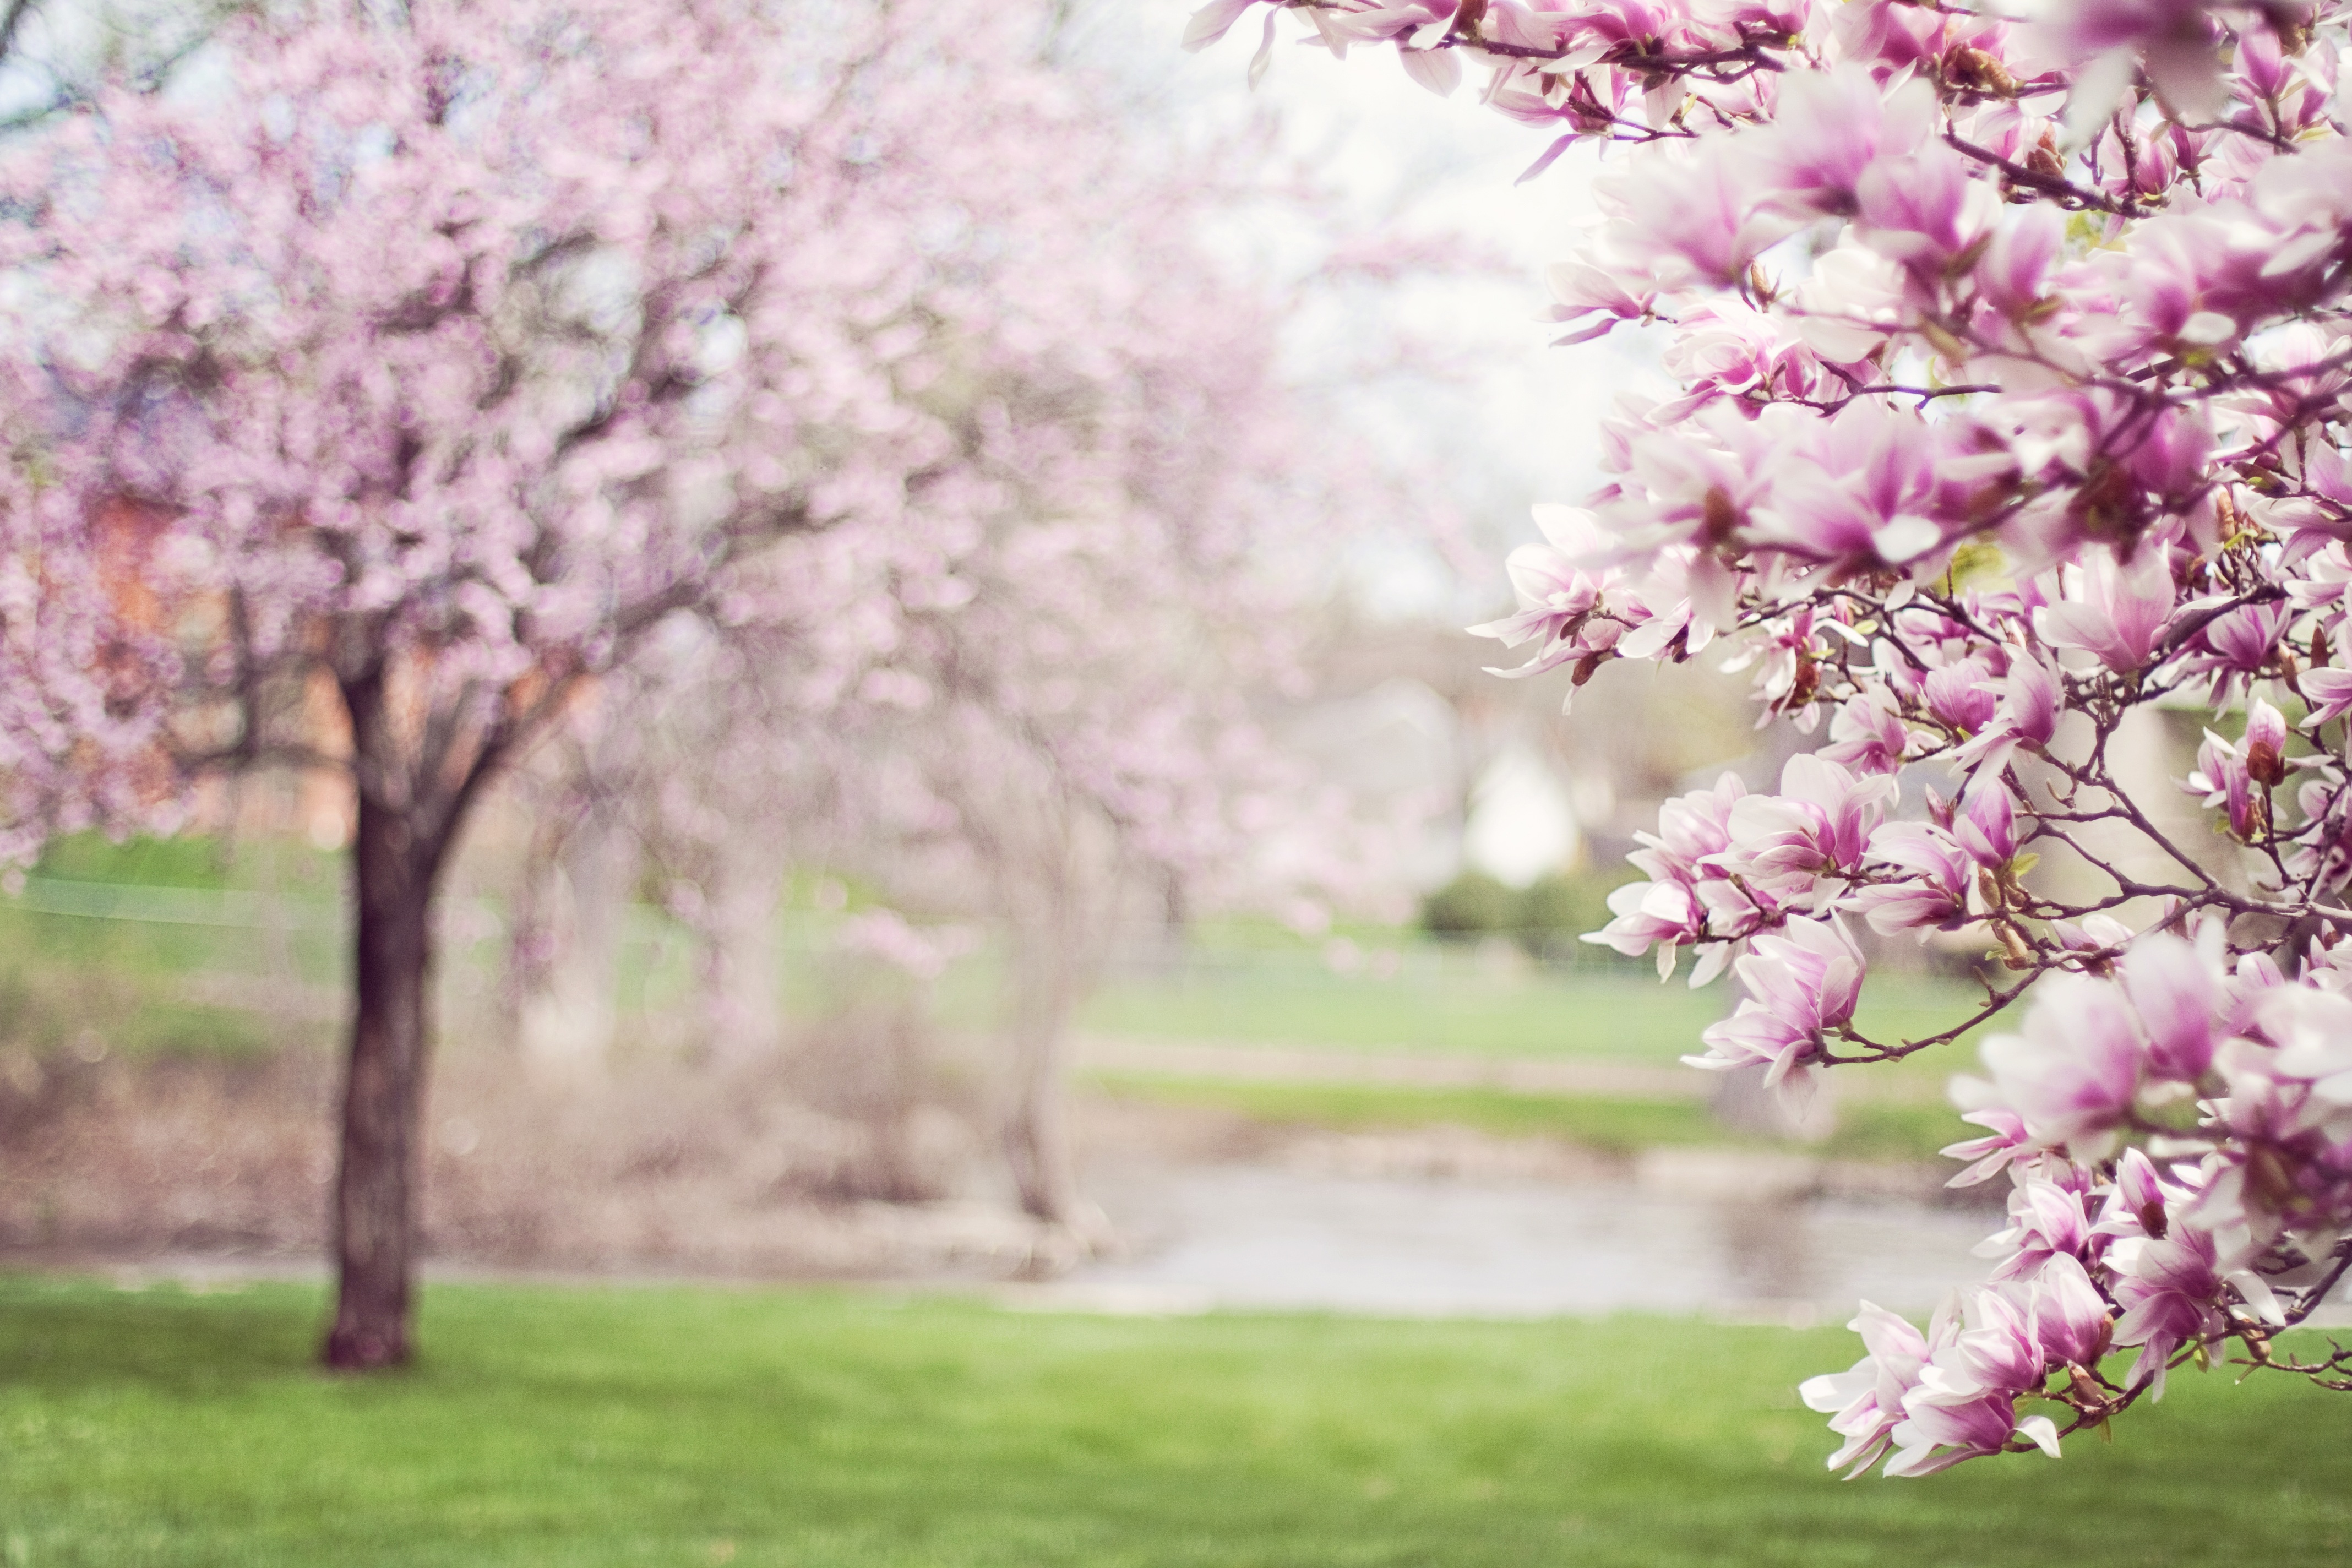 earth, blossom, depth of field, magnolia, nature, park, pink flower, spring, tree, flowers